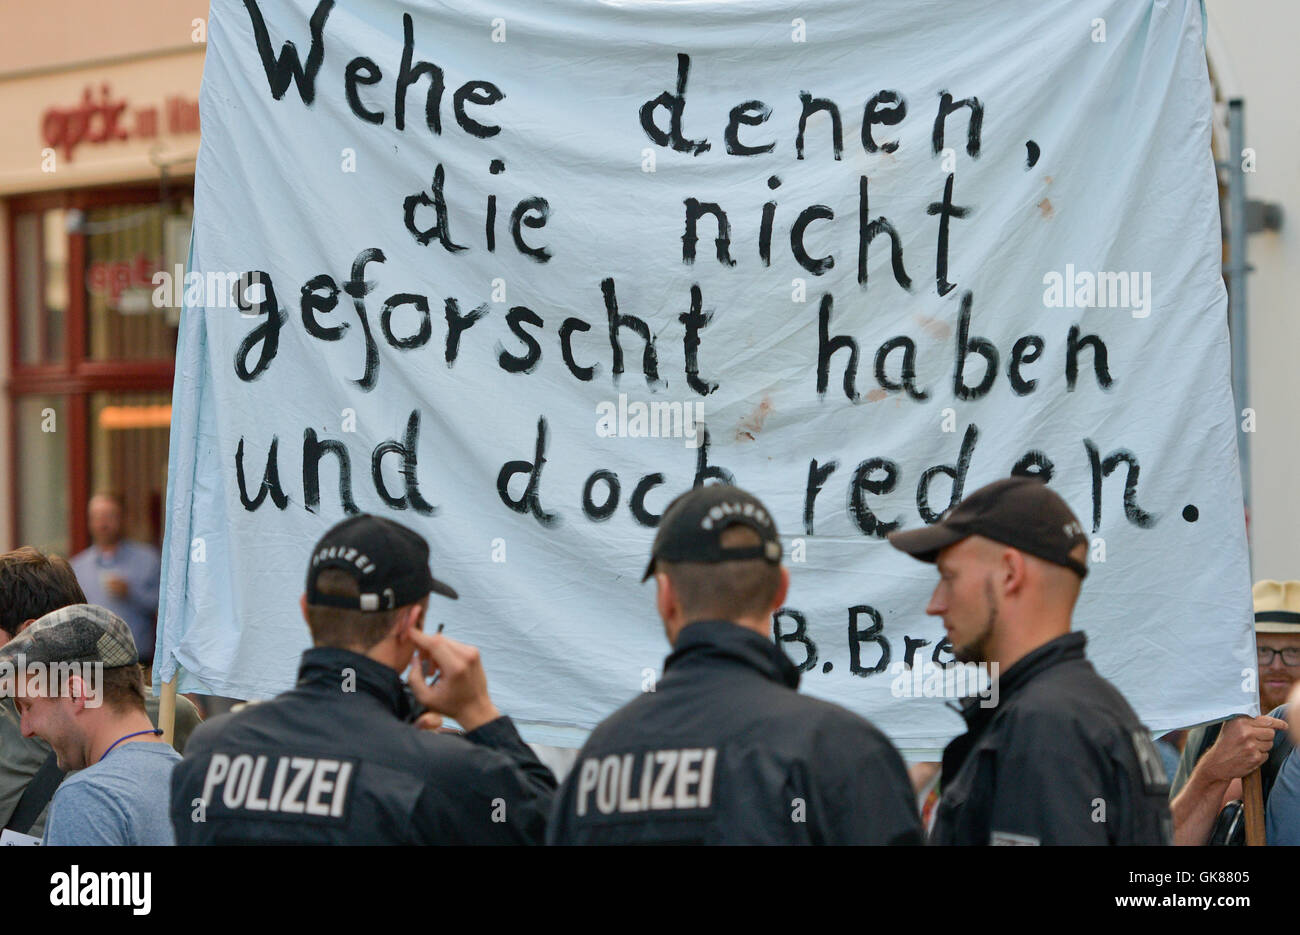 Schwerin, Germany. 19th Aug, 2016. People have gathered in a counter demonstration againstr Attendants to the far-right Alternative for Germany (AfD) party election rally, they are holding a banner that reads 'Wehe denen, die nicht geforscht haben und doch reden.' (lt. 'Woe to those who have not researched yet talk' at the Marktplatz in Schwerin, Germany, 19 August 2016. The state elections in Mecklenburg-Western Pomerania will be held on 04 September 2016. Photo: AXEL HEIMKEN/dpa/Alamy Live News Stock Photo